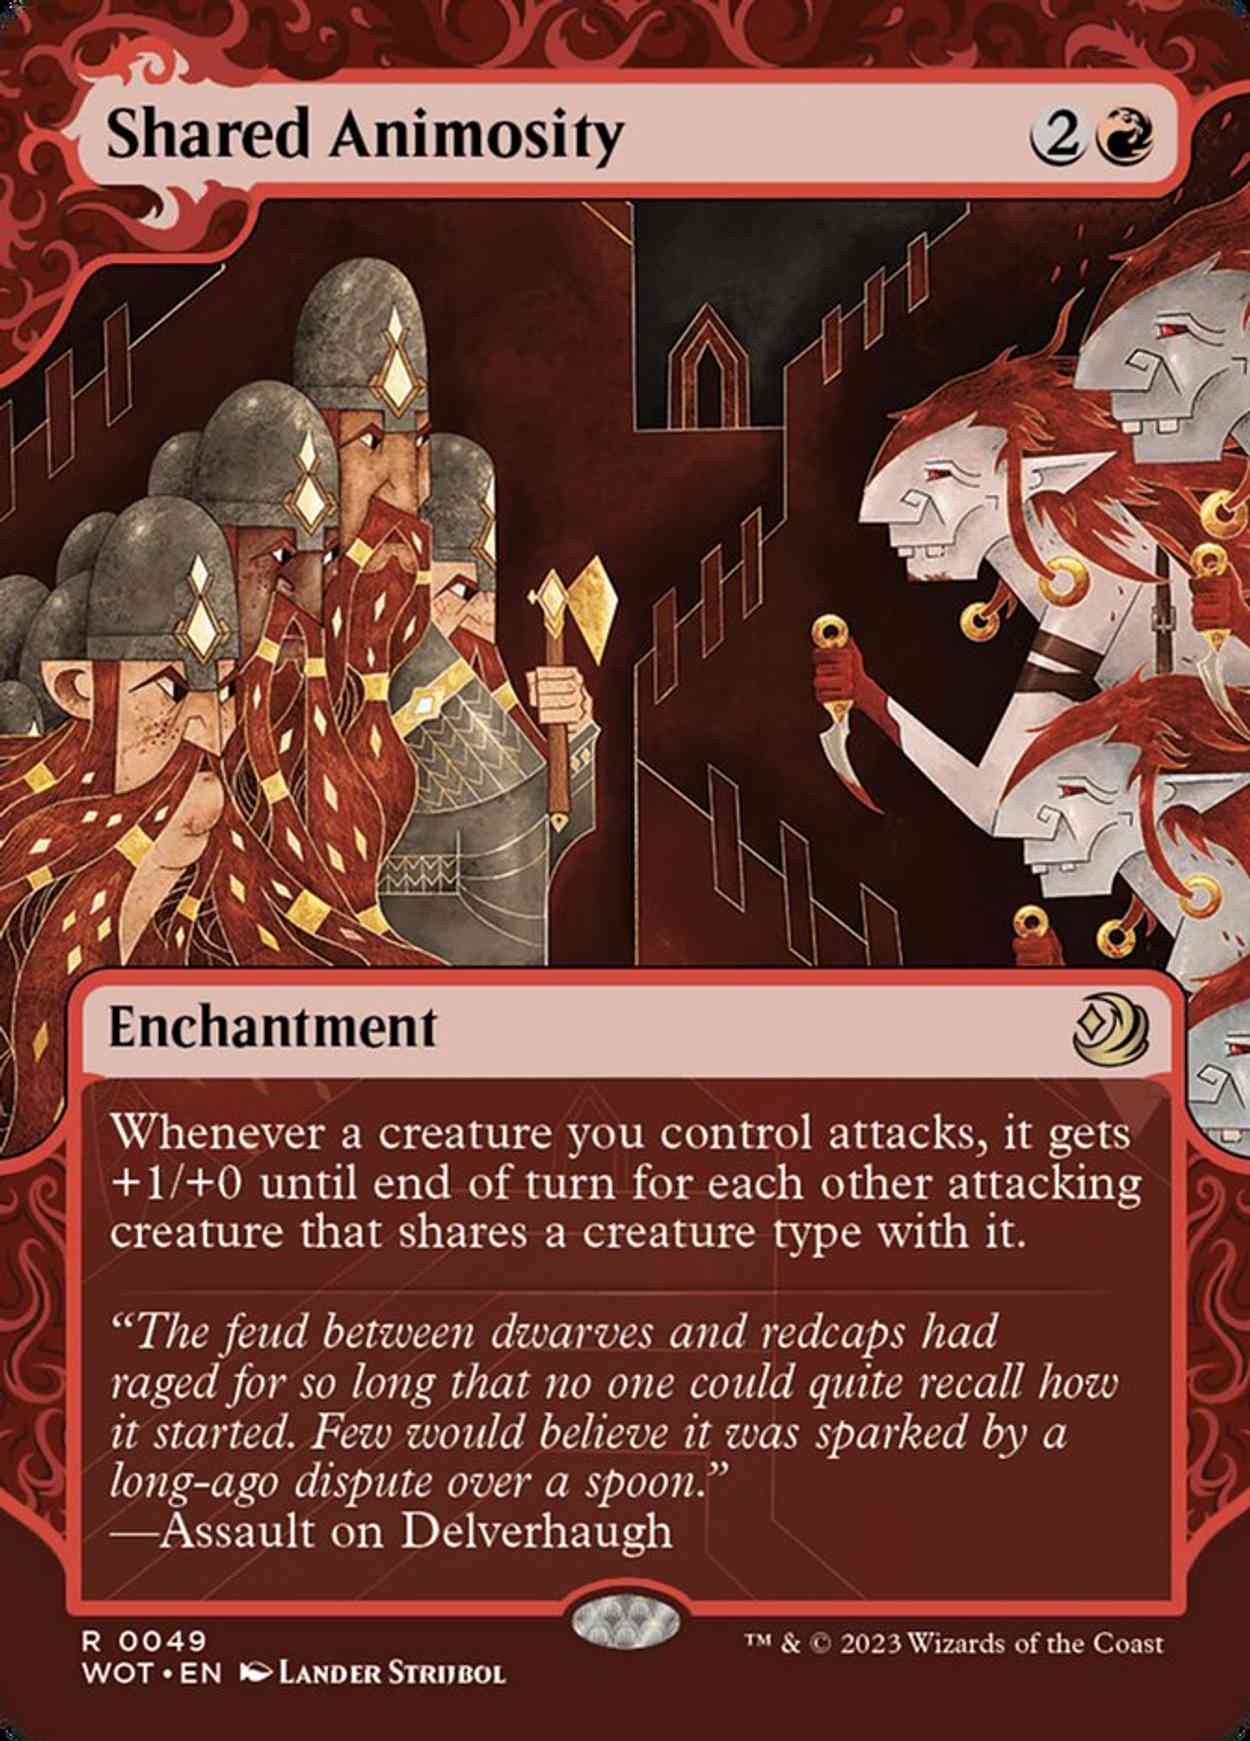 Shared Animosity magic card front